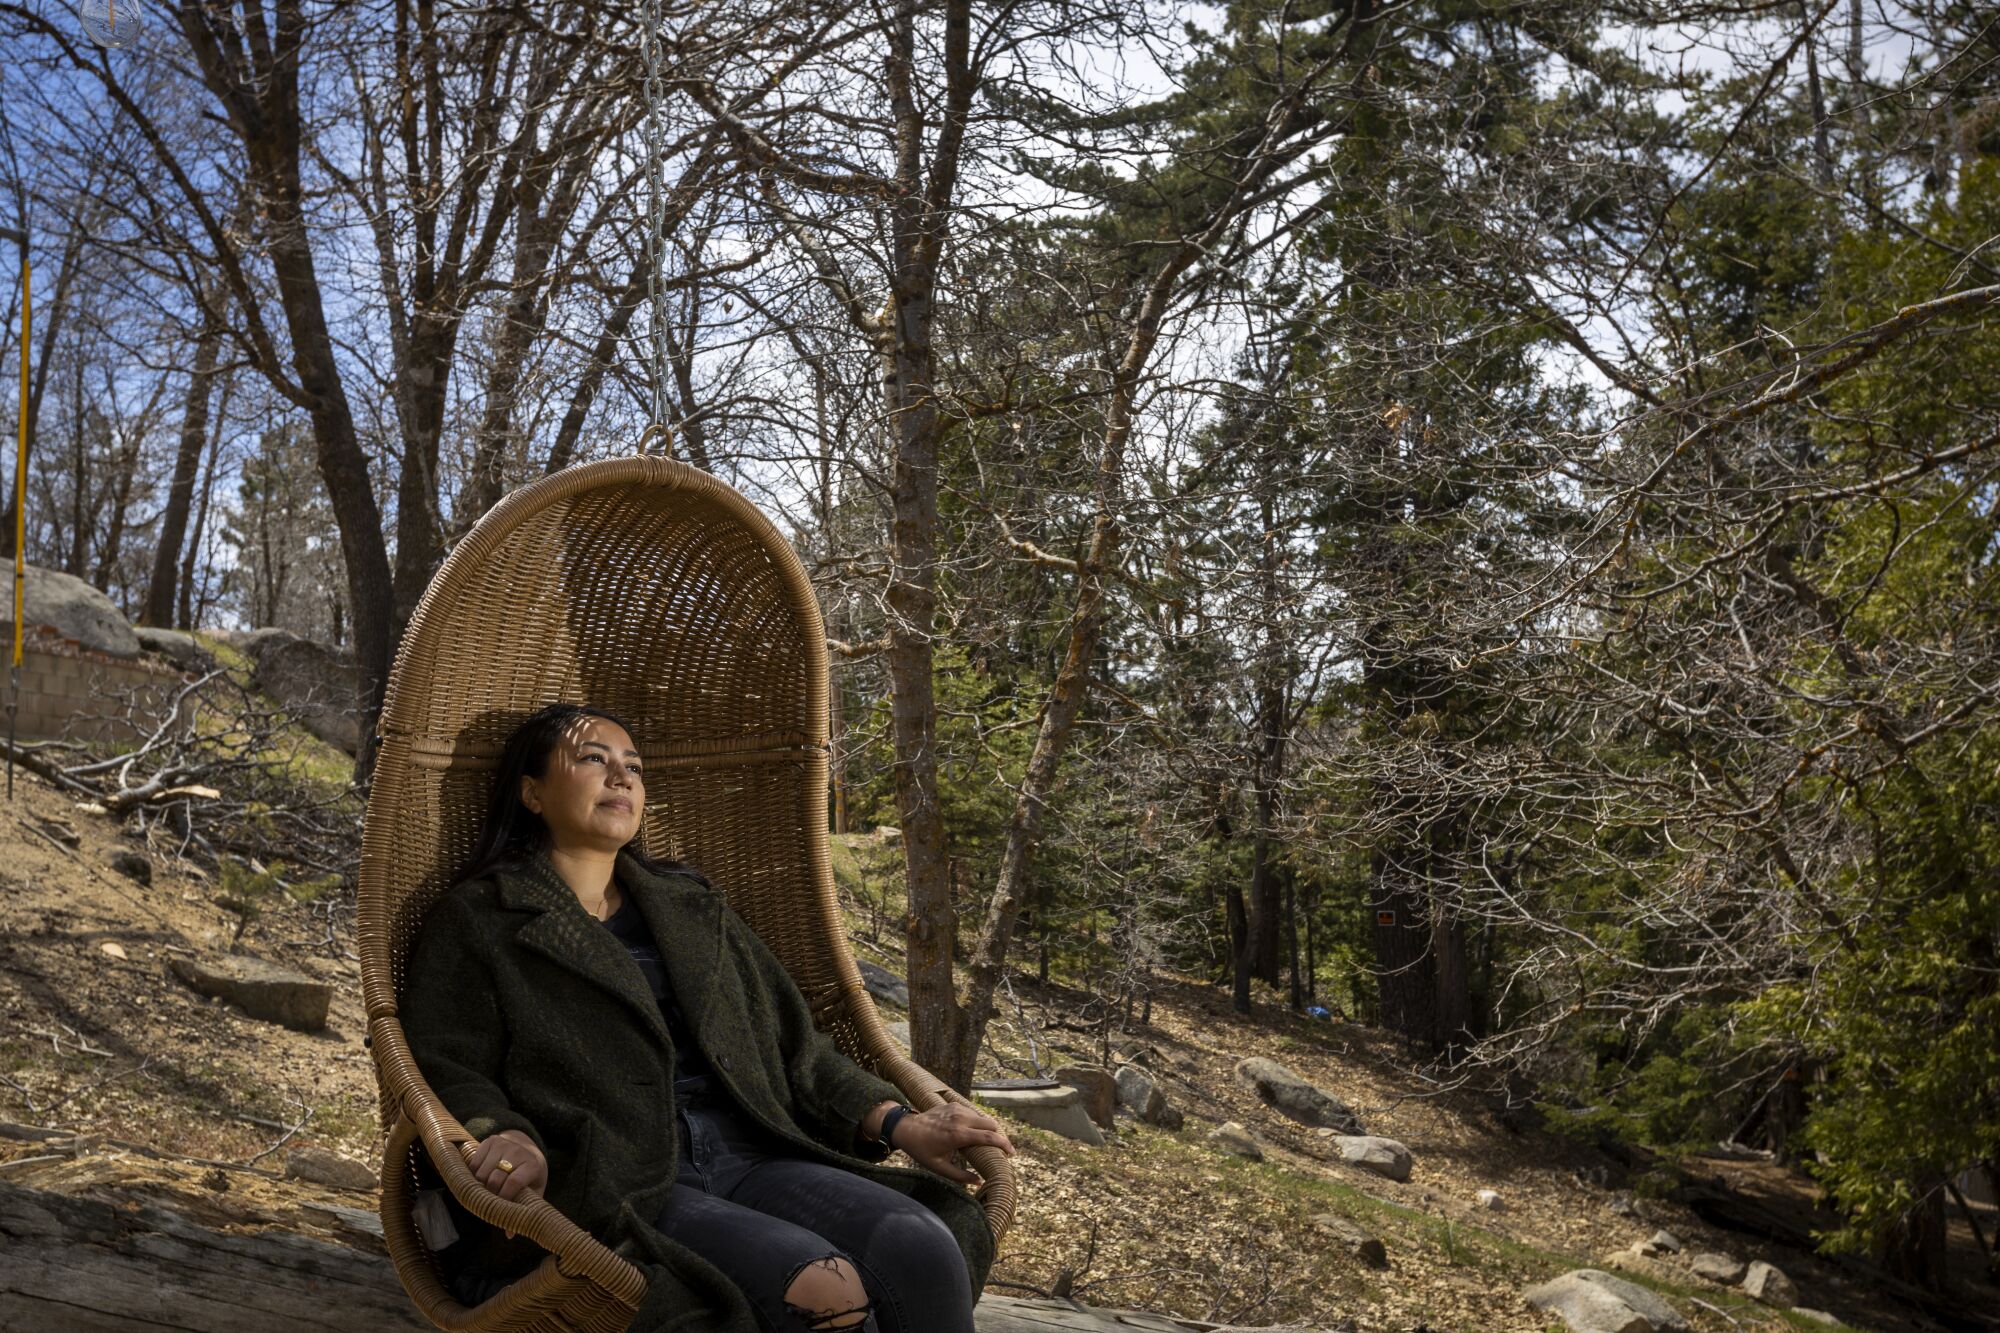 Natalie Camunas relaxes in a swing chair amid trees